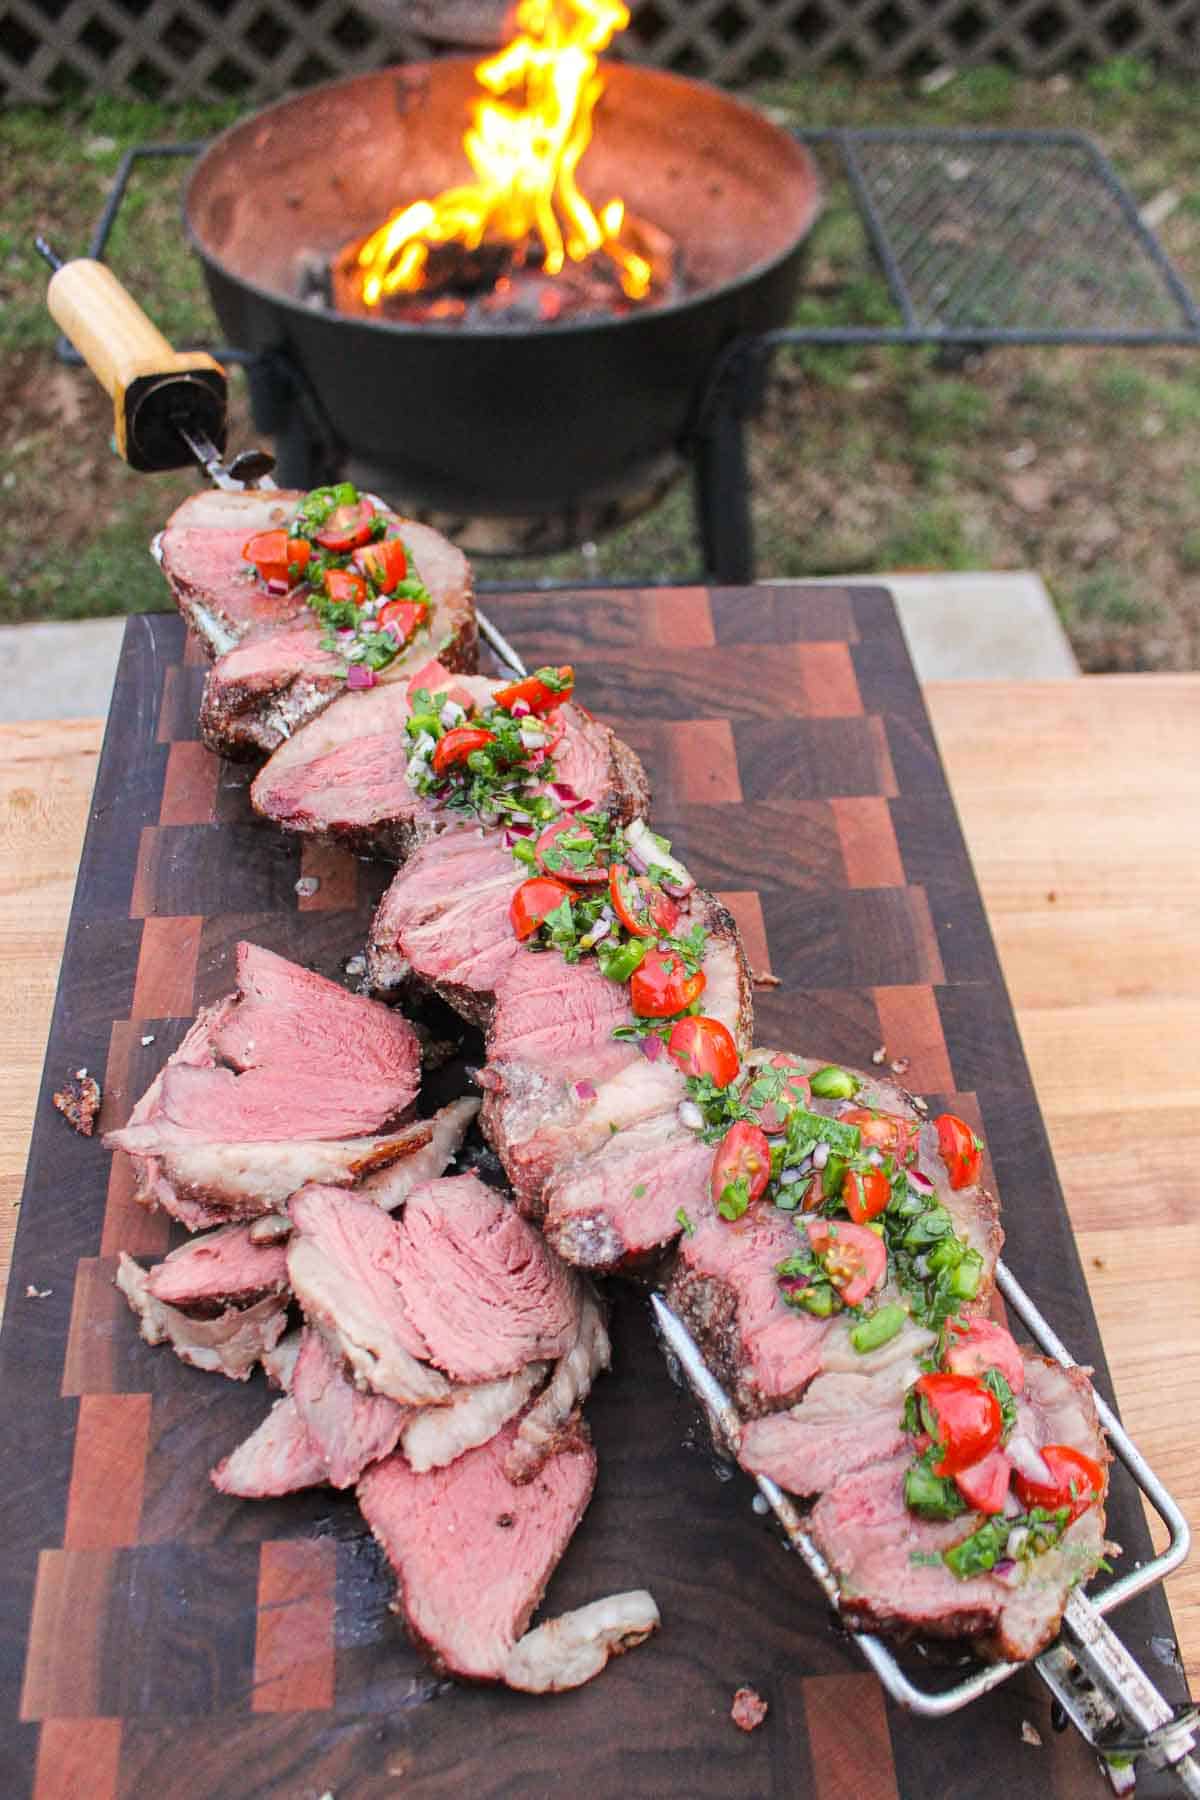 One final shot of the picanha being served topped with the fresh salsa.